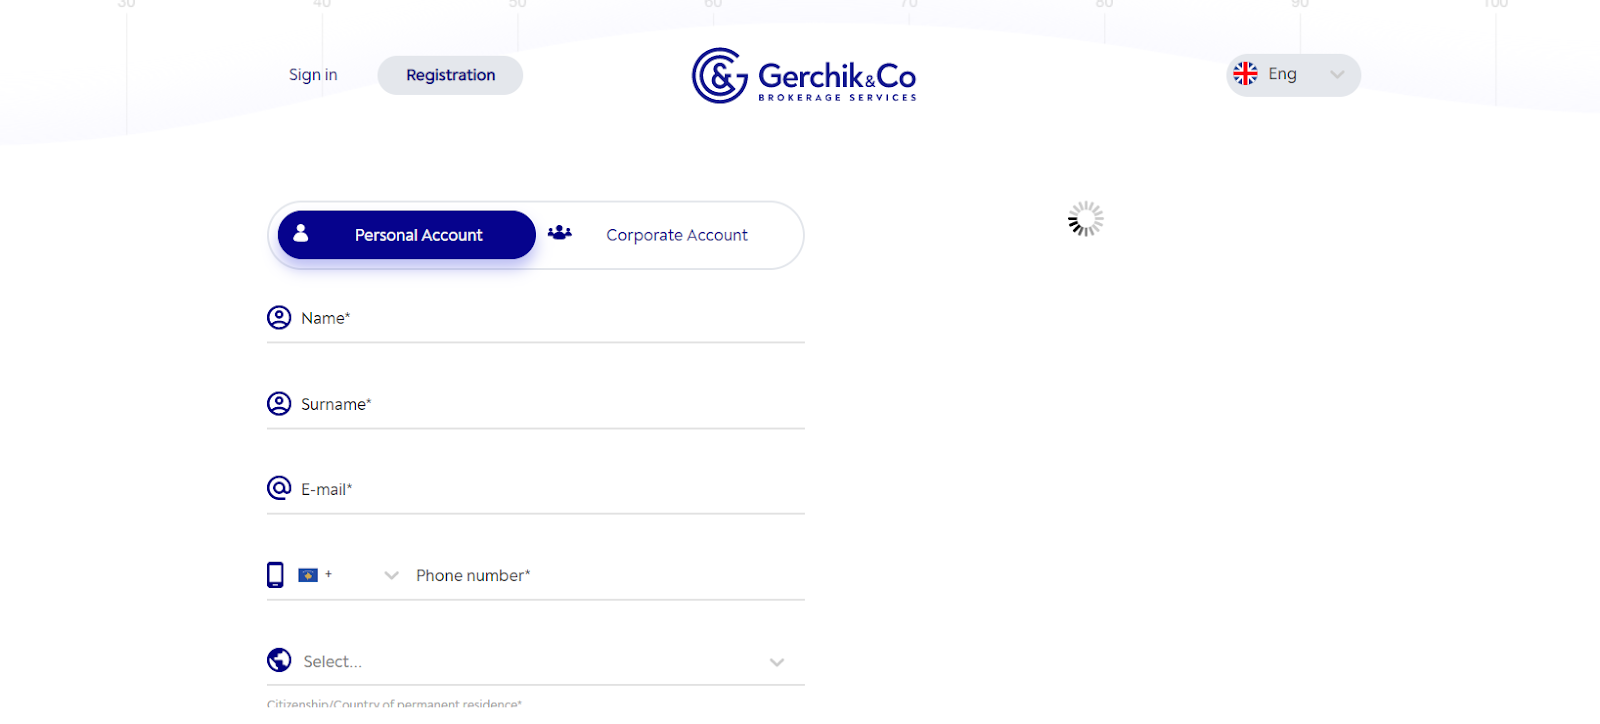 Overview of Gerchik&Co’ User Account — Registration